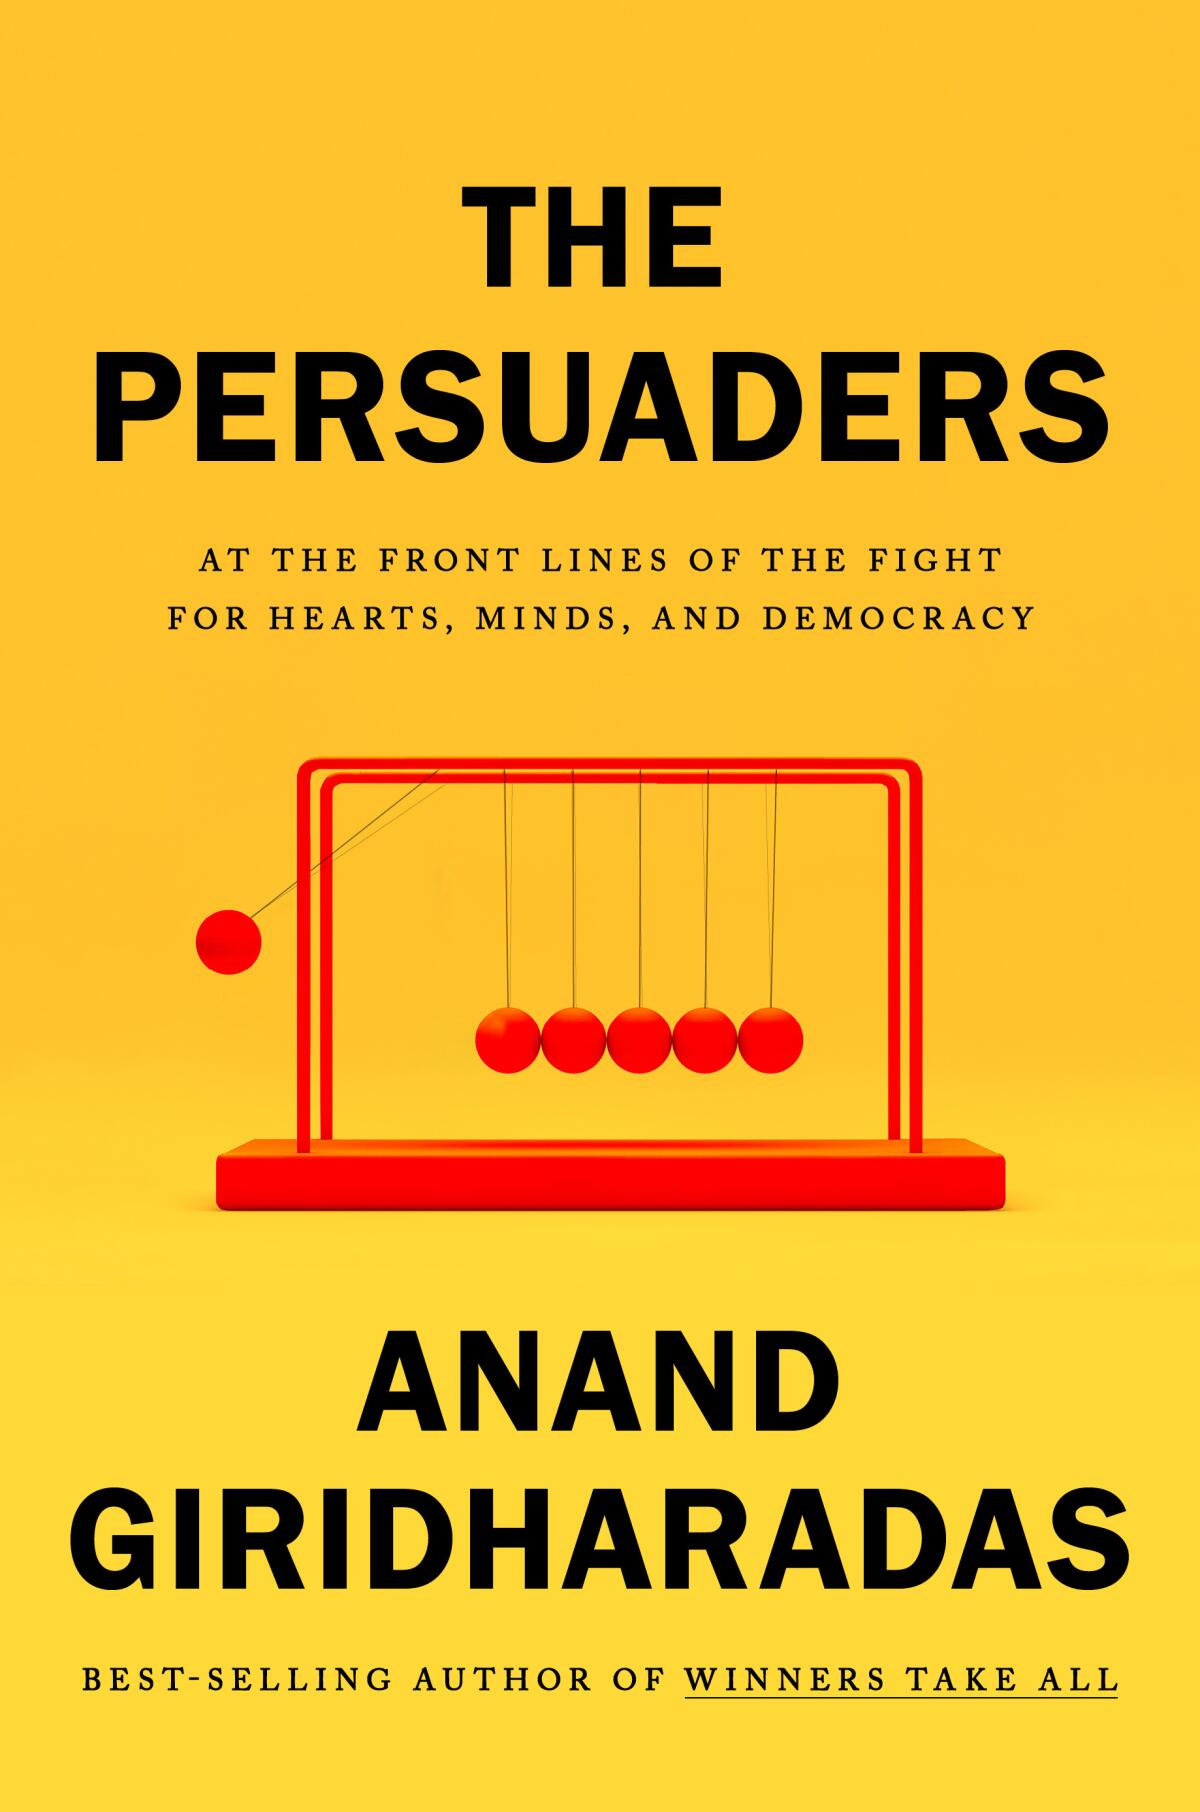 "The Persuaders," by Anand Giridharadas